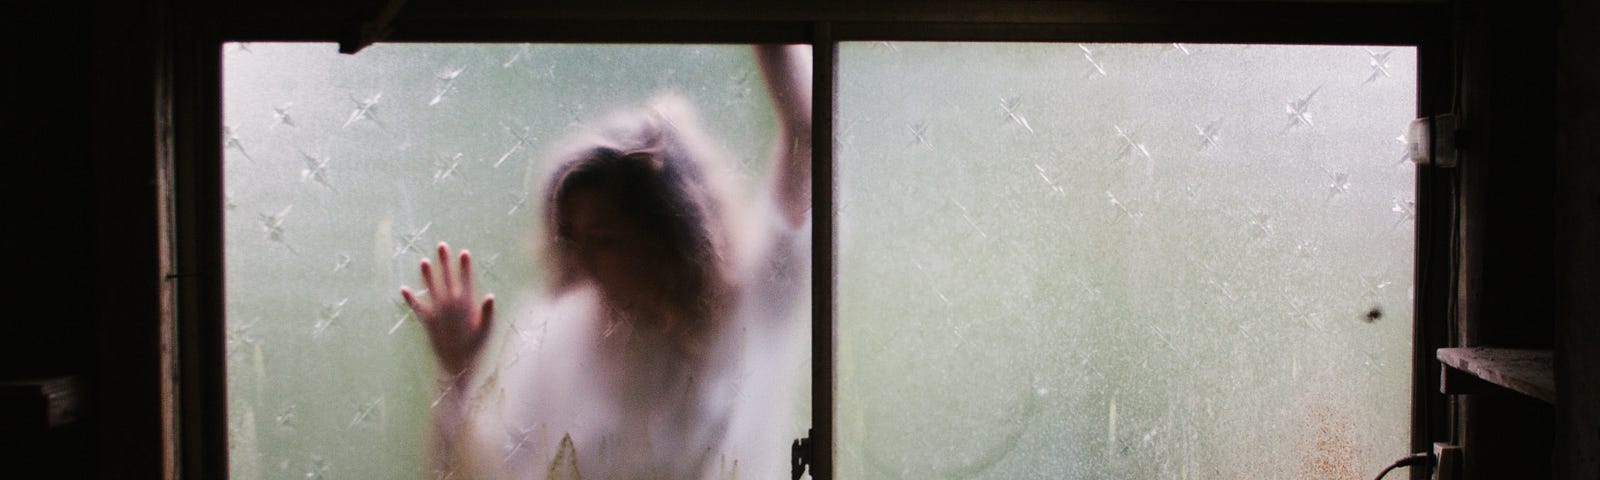 a girl trying to escape from a closed window